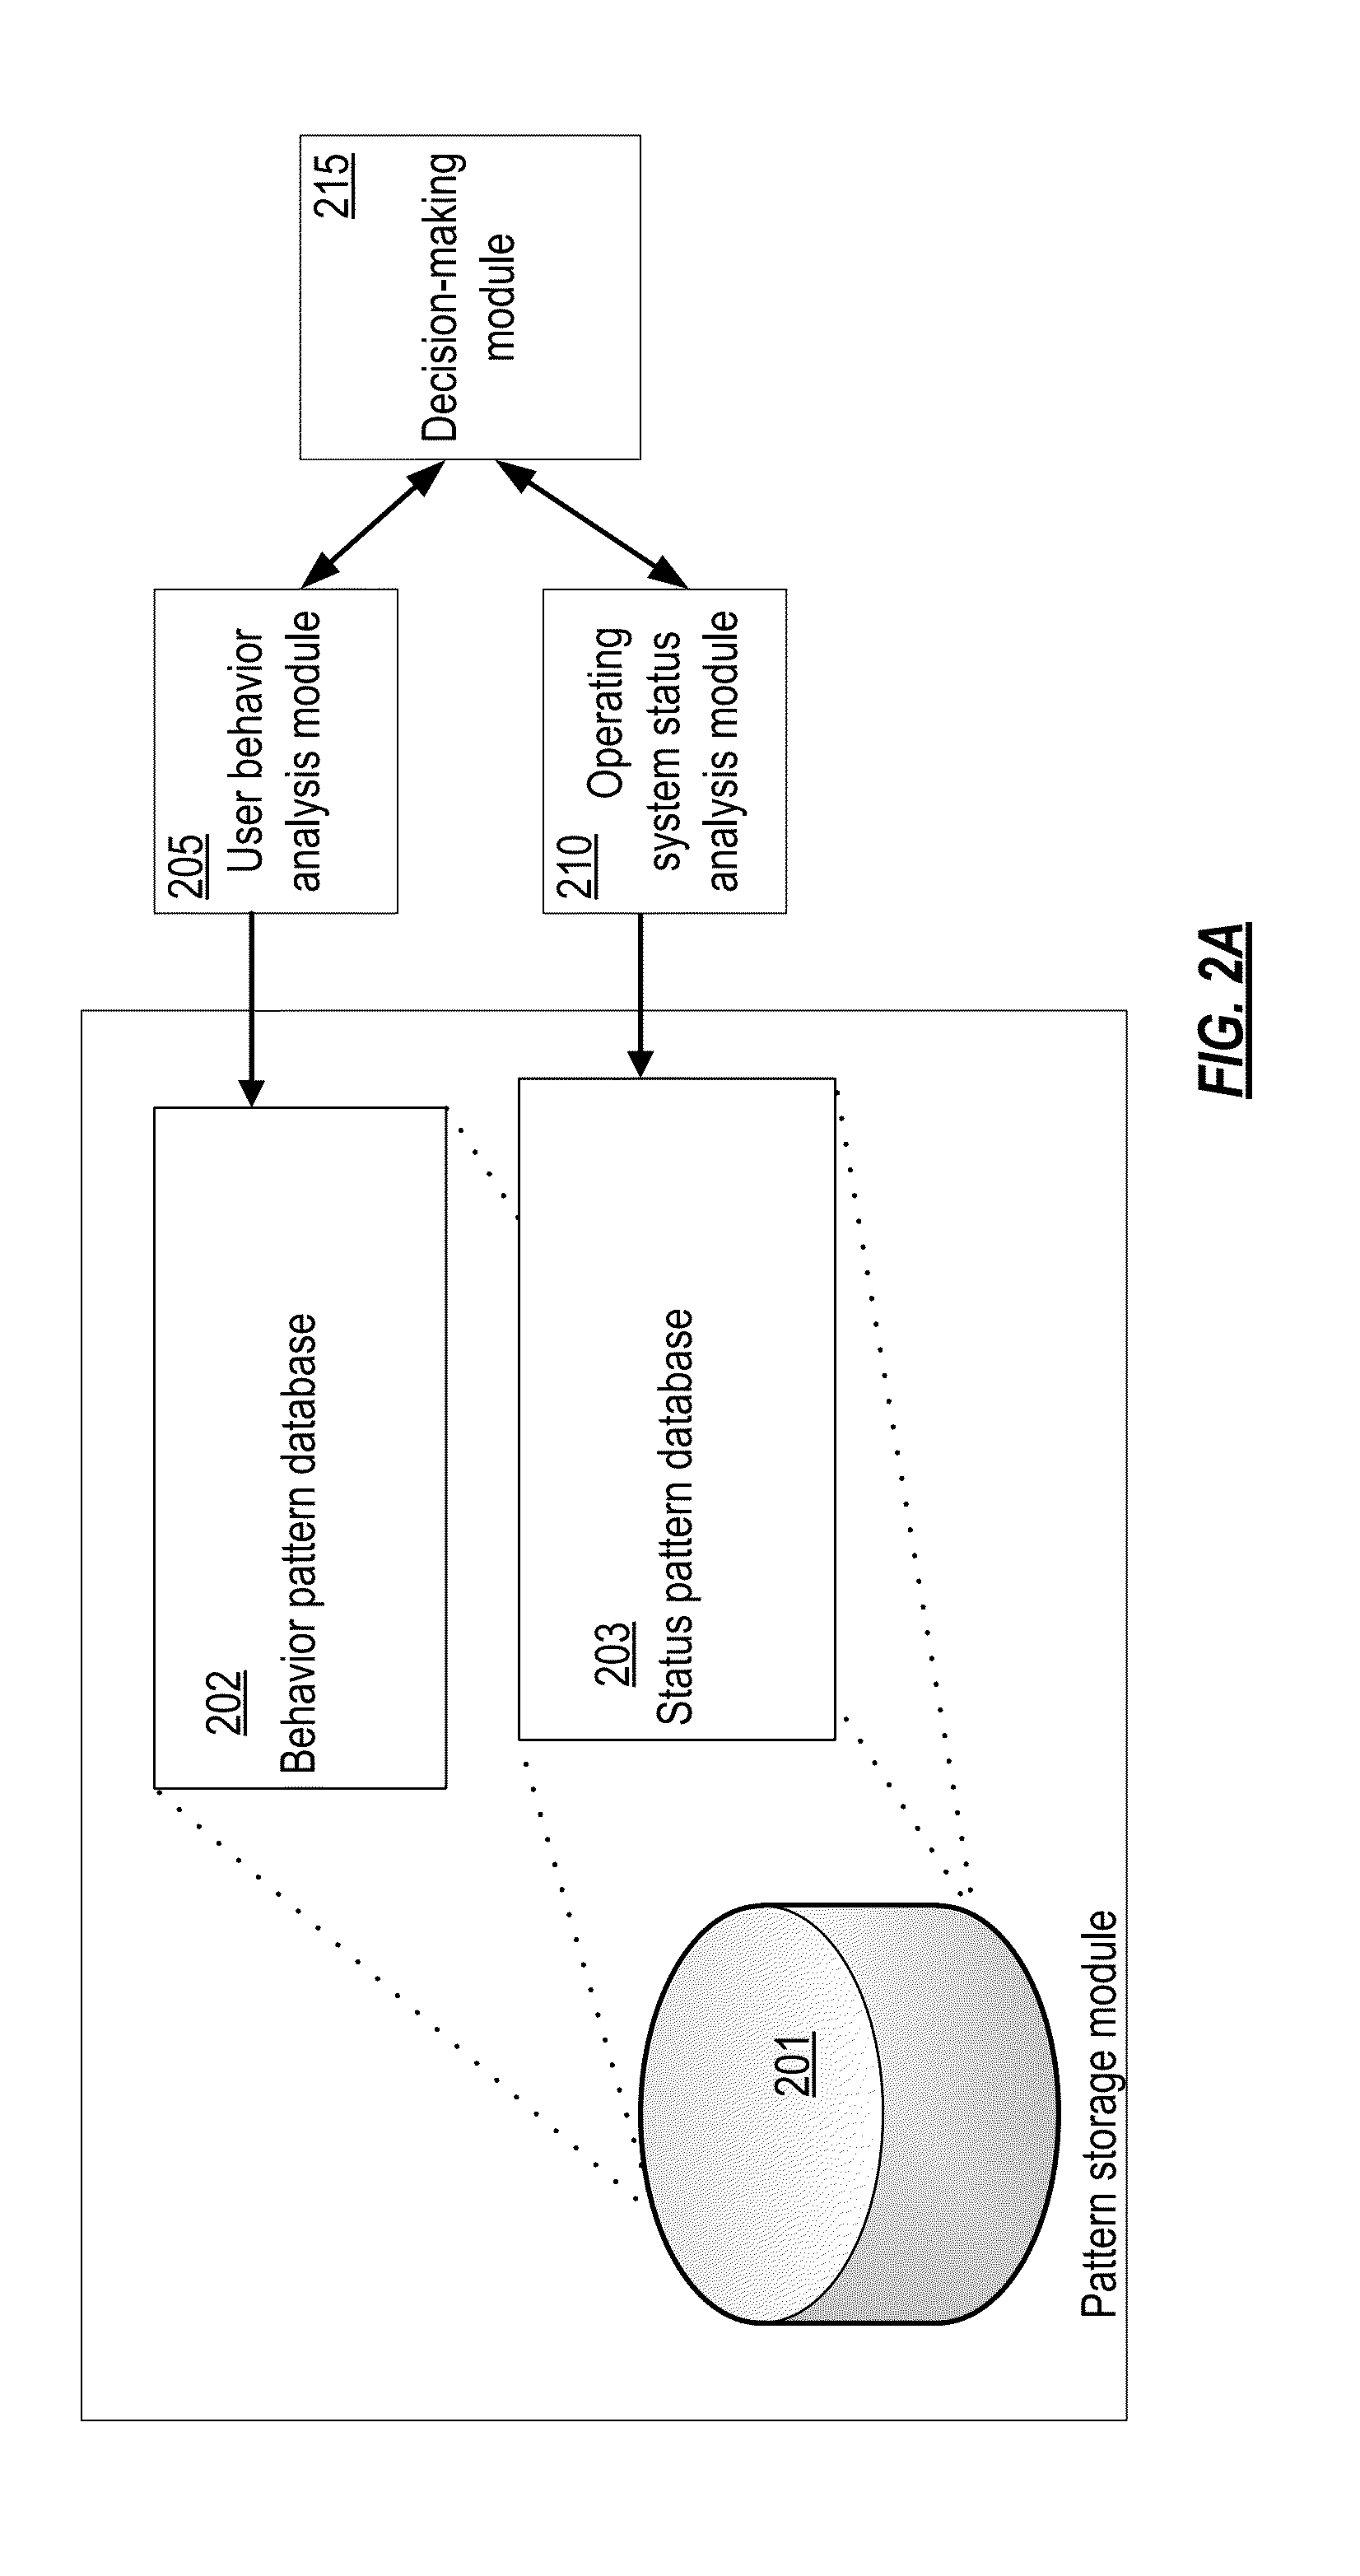 System and method for detecting malware that interferes with the user interface